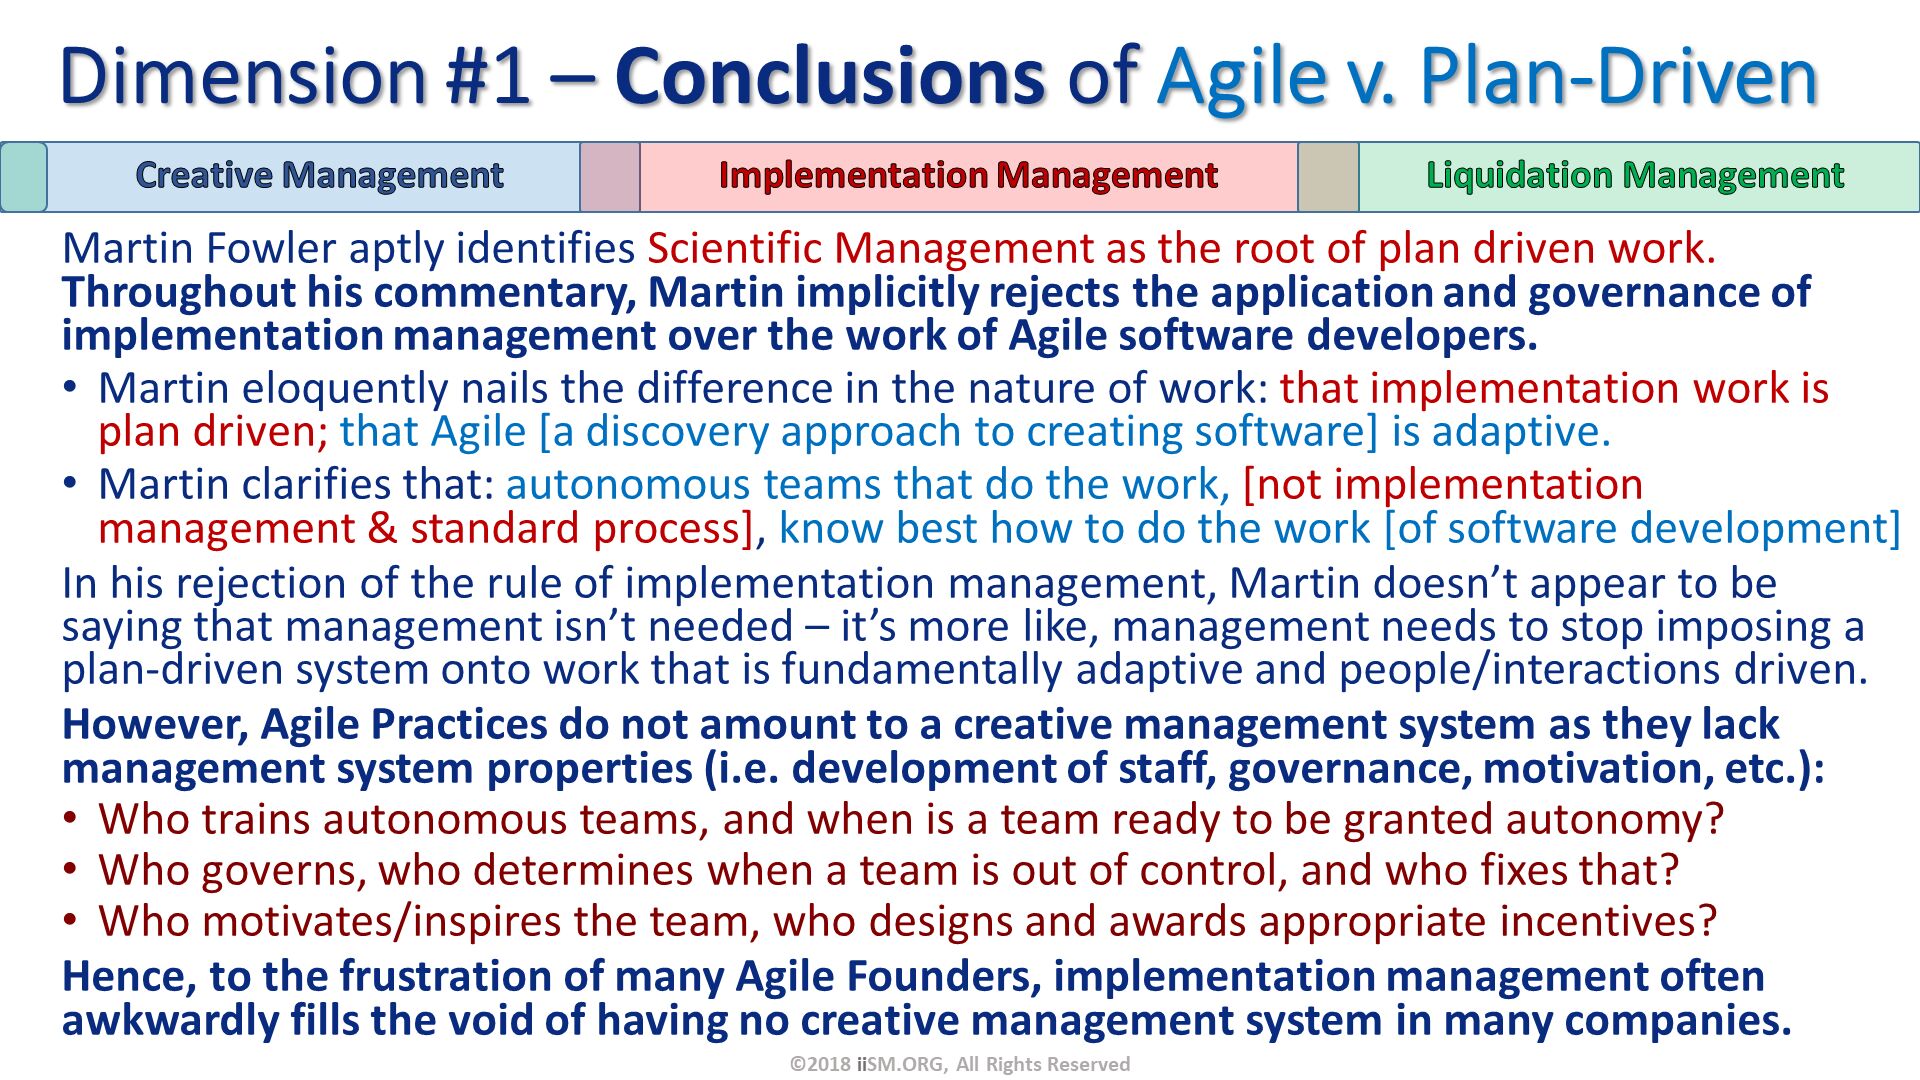 Martin Fowler aptly identifies Scientific Management as the root of plan driven work.  Throughout his commentary, Martin implicitly rejects the application and governance of implementation management over the work of Agile software developers.
Martin eloquently nails the difference in the nature of work: that implementation work is plan driven; that Agile [a discovery approach to creating software] is adaptive.
Martin clarifies that: autonomous teams that do the work, [not implementation management & standard process], know best how to do the work [of software development]  
In his rejection of the rule of implementation management, Martin doesn’t appear to be saying that management isn’t needed – it’s more like, management needs to stop imposing a plan-driven system onto work that is fundamentally adaptive and people/interactions driven.  
However, Agile Practices do not amount to a creative management system as they lack management system properties (i.e. development of staff, governance, motivation, etc.):
Who trains autonomous teams, and when is a team ready to be granted autonomy?
Who governs, who determines when a team is out of control, and who fixes that?
Who motivates/inspires the team, who designs and awards appropriate incentives?
Hence, to the frustration of many Agile Founders, implementation management often awkwardly fills the void of having no creative management system in many companies. Dimension #1 – Conclusions of Agile v. Plan-Driven. ©2018 iiSM.ORG, All Rights Reserved. 